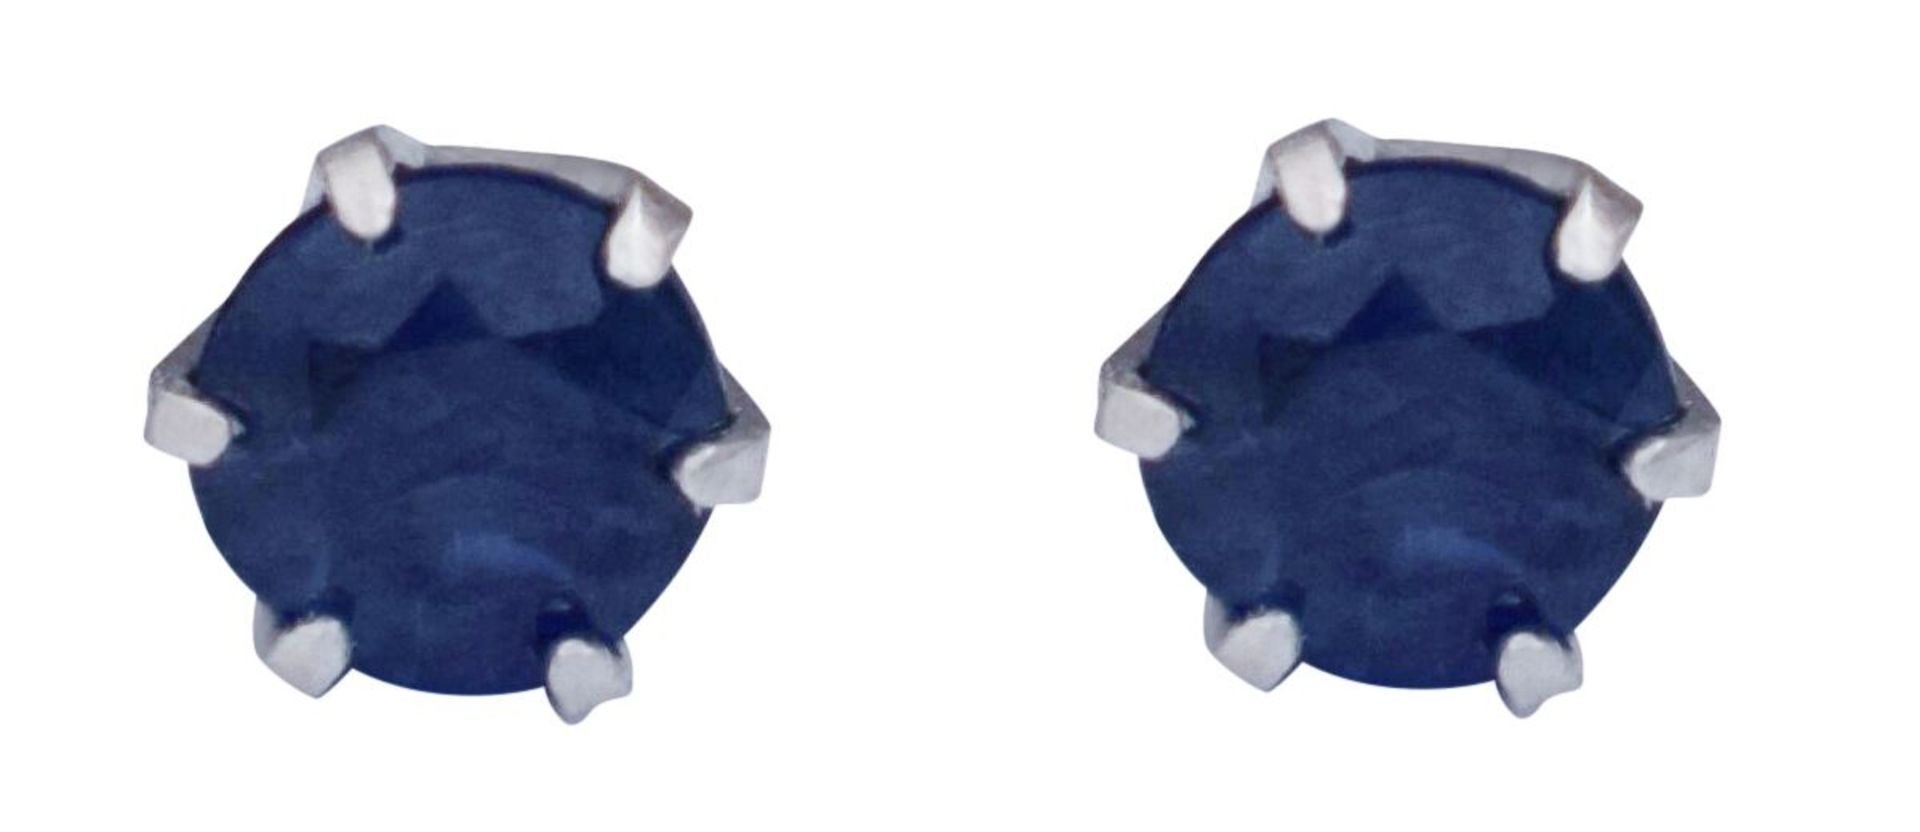 Sapphire Earrings in Platinum, Metal Platinum 900, Weight 0.59, RRP £229.99 (1a863idsu)(Comes with